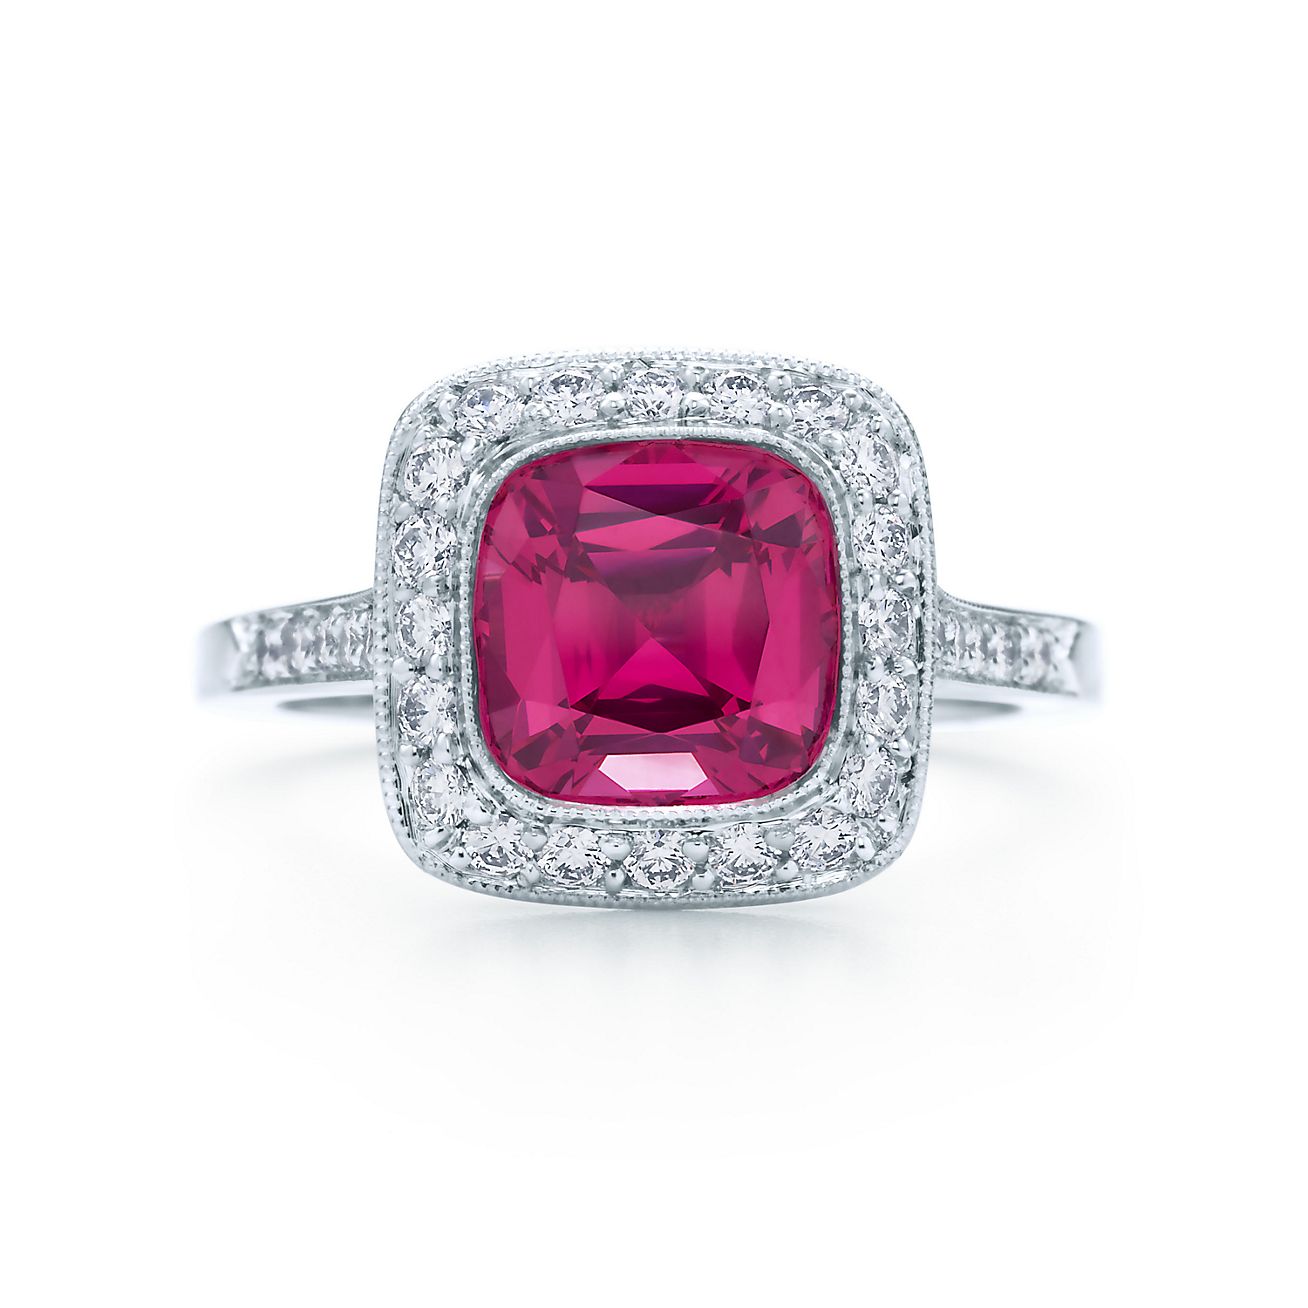 Tiffany Legacy® red spinel ring in 